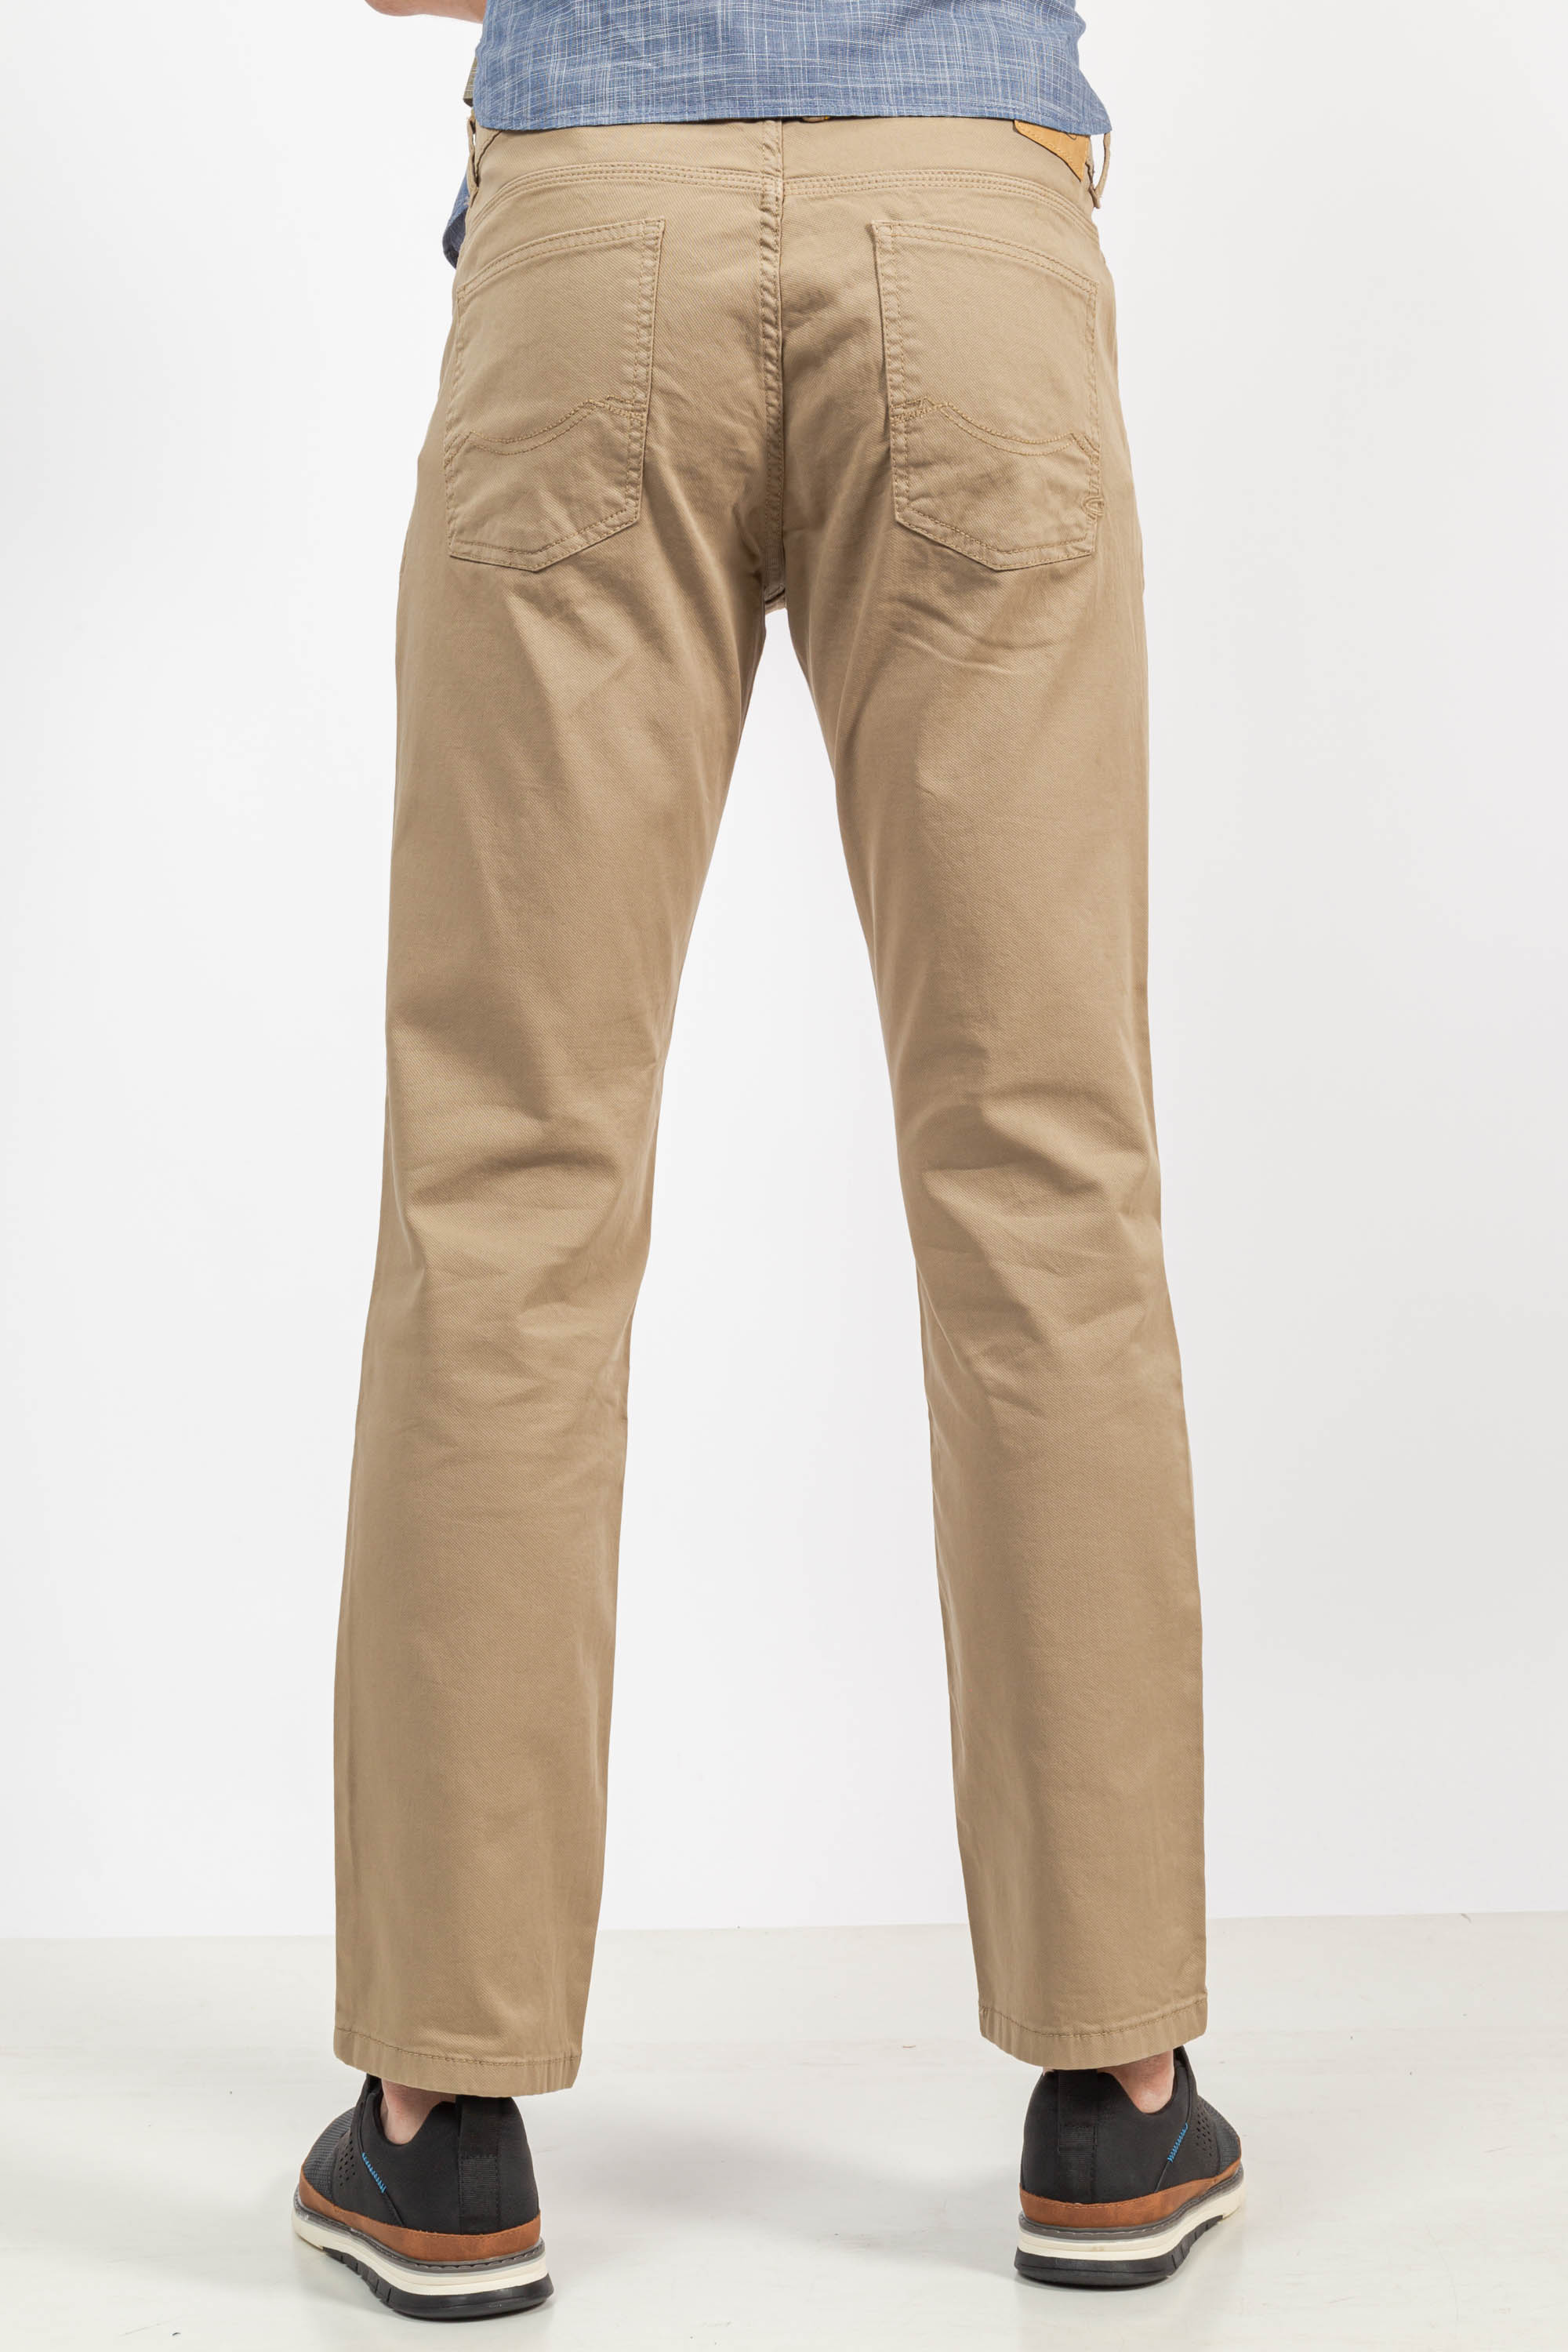 Camel active corduroy pants Mens Fashion Bottoms Trousers on Carousell